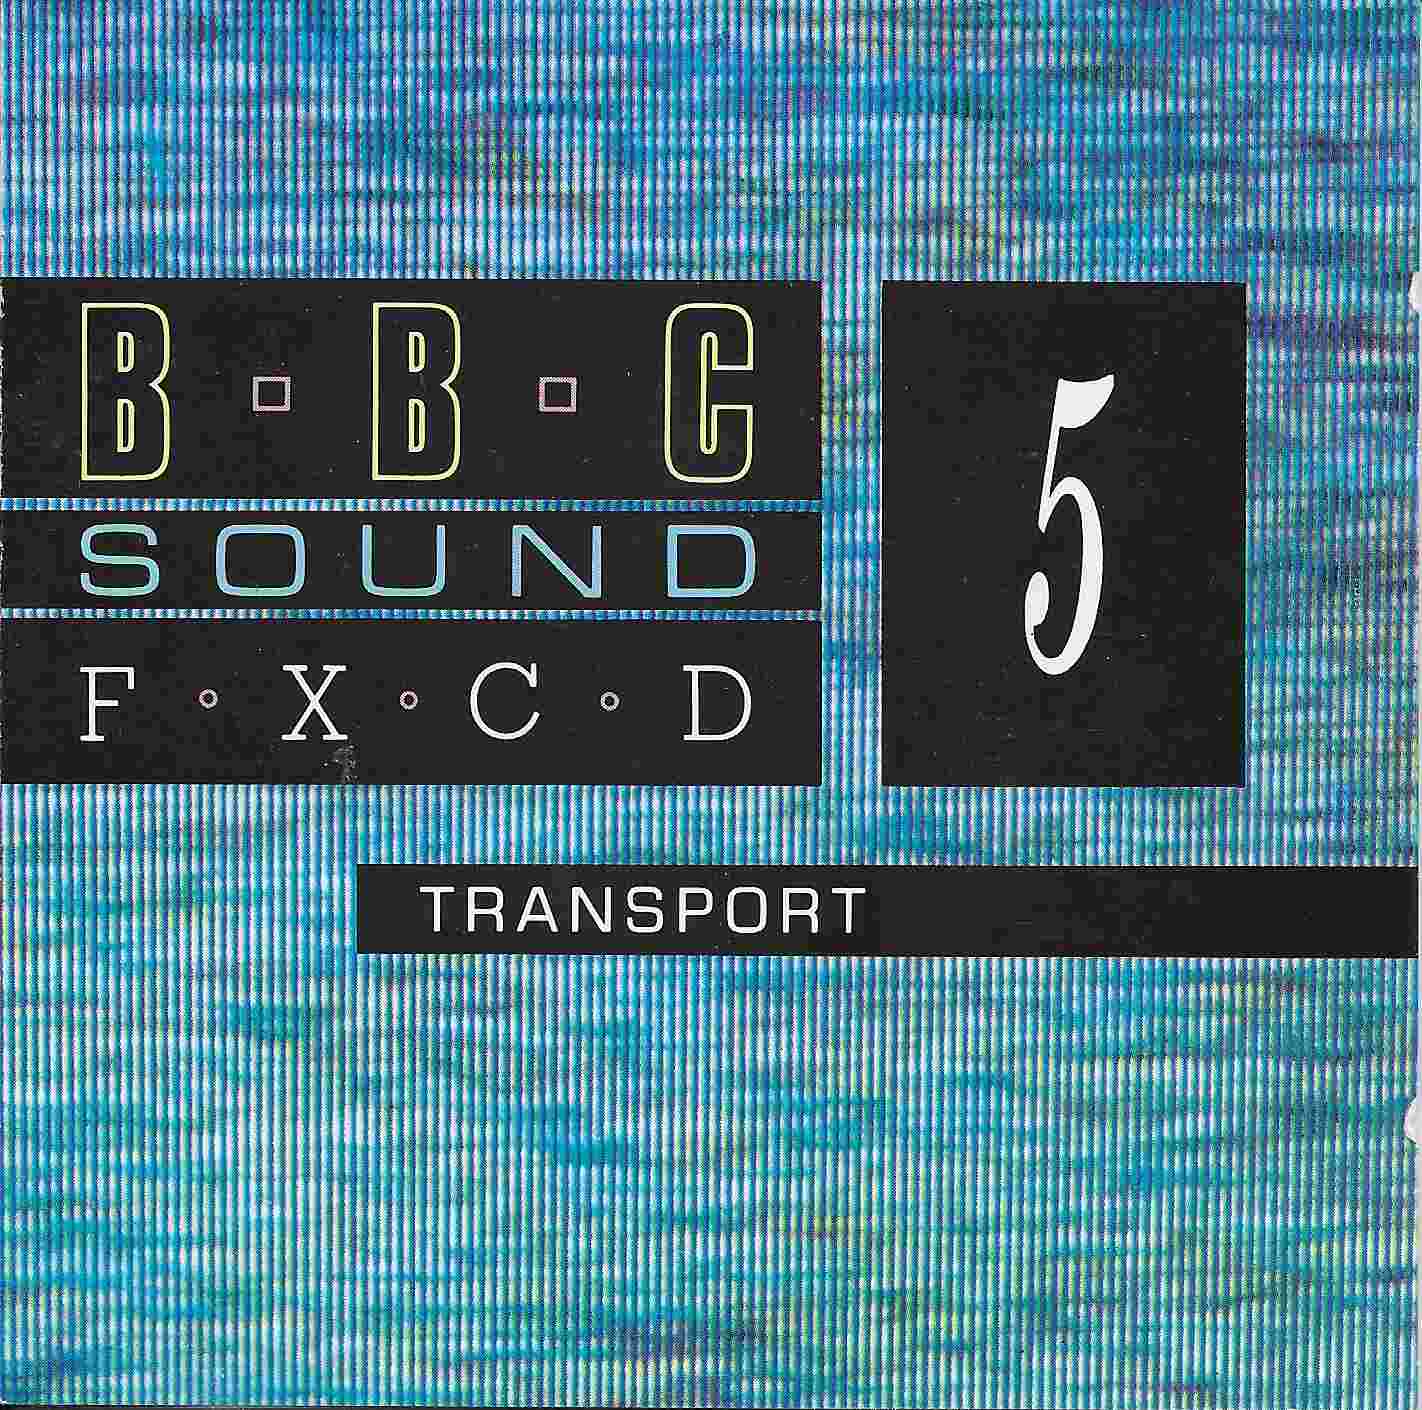 Picture of Transport by artist Various from the BBC cds - Records and Tapes library